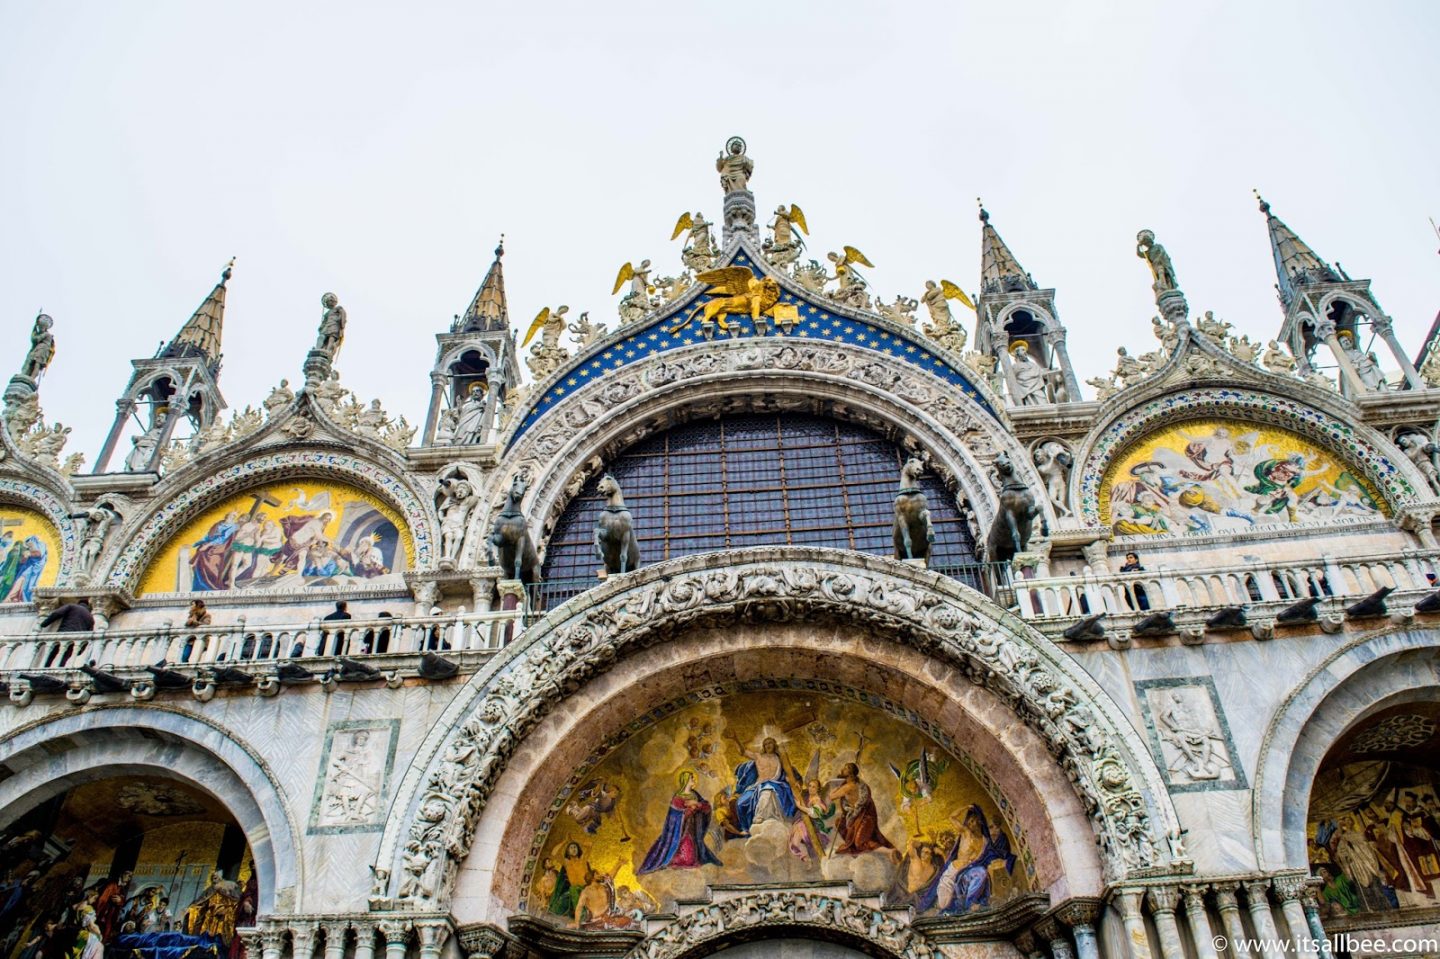  A Day In Venice - The Perfect 1 Day Venice Itinerary